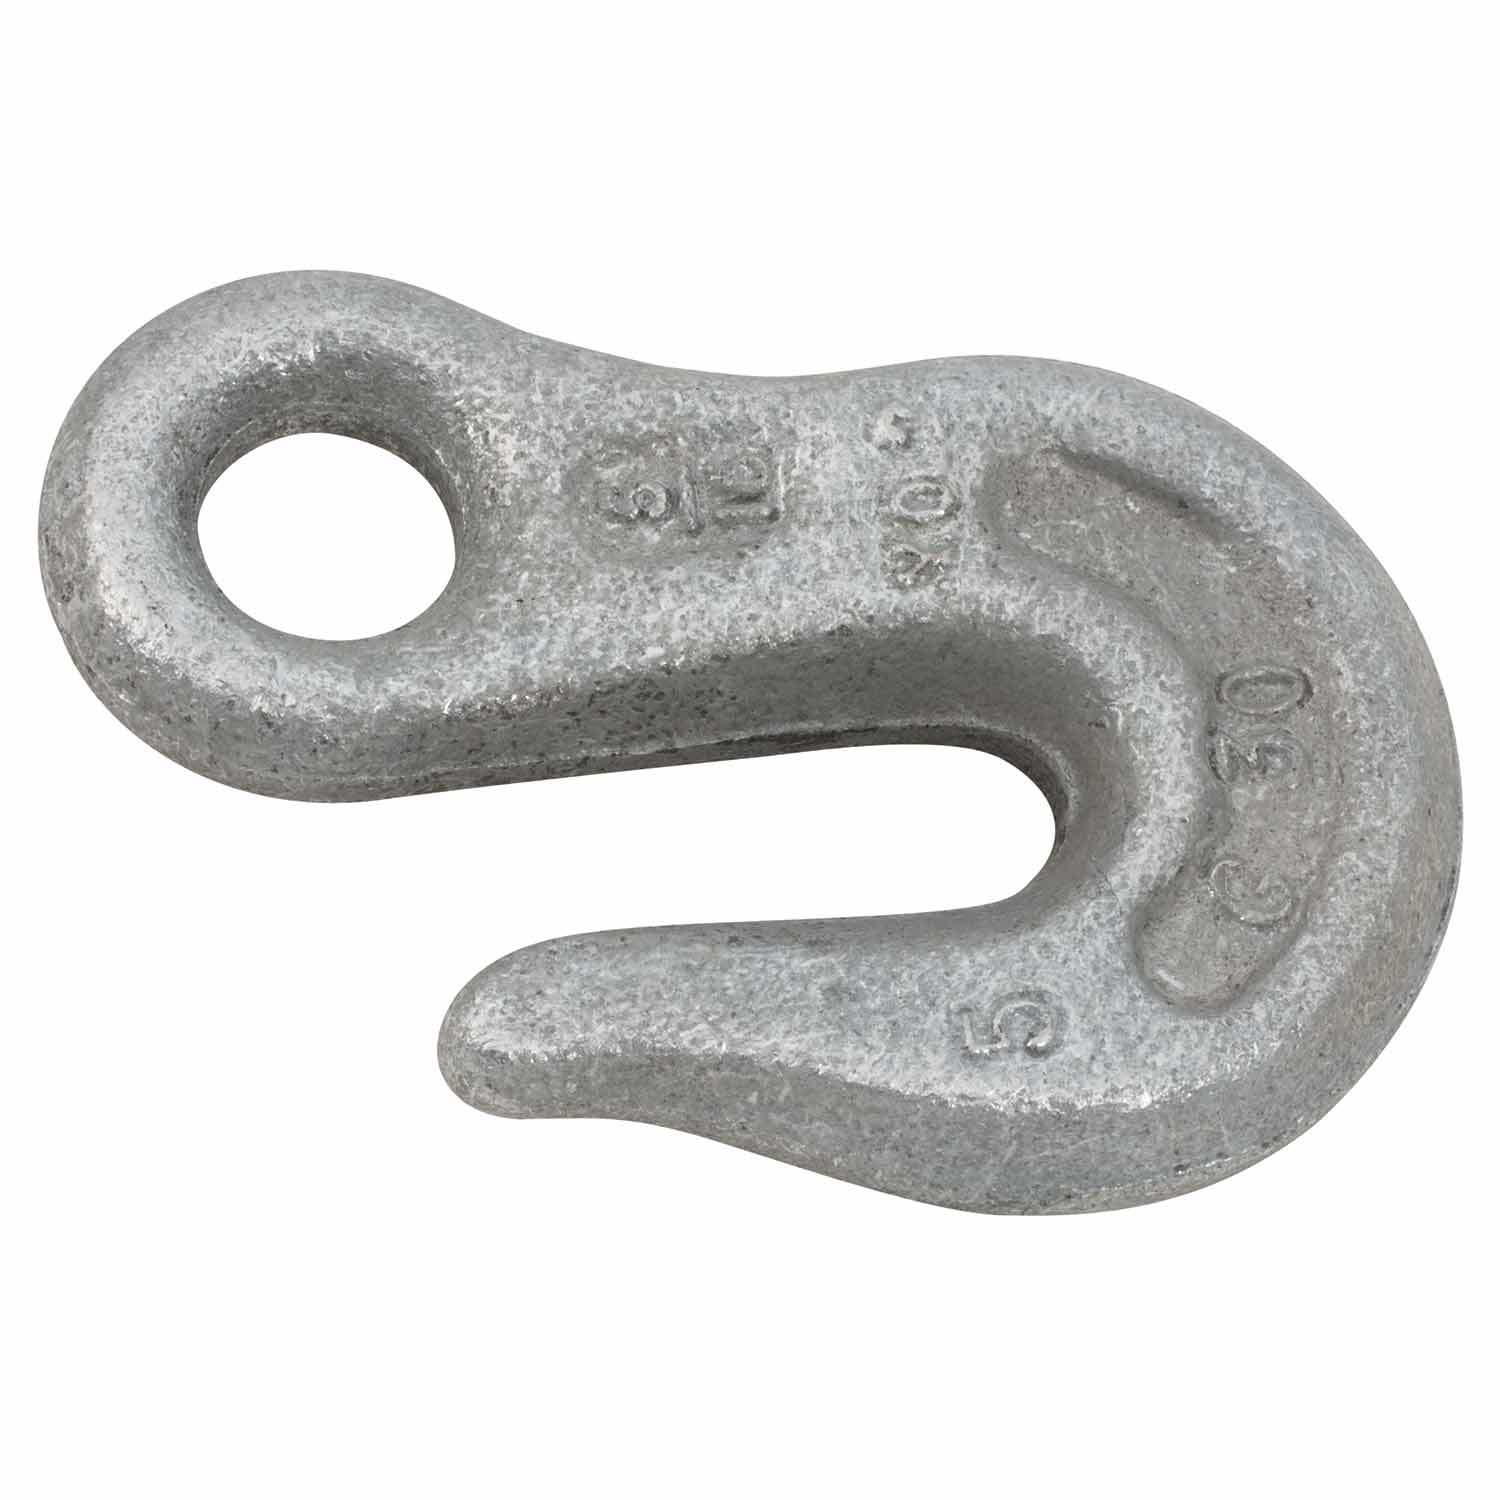 Stainless Steel Marine Boat 1/2'' Precision Cast Eye Grab Hook Chain Anchor  T316 - Buy China Wholesale Stainless Steel Hook $0.5